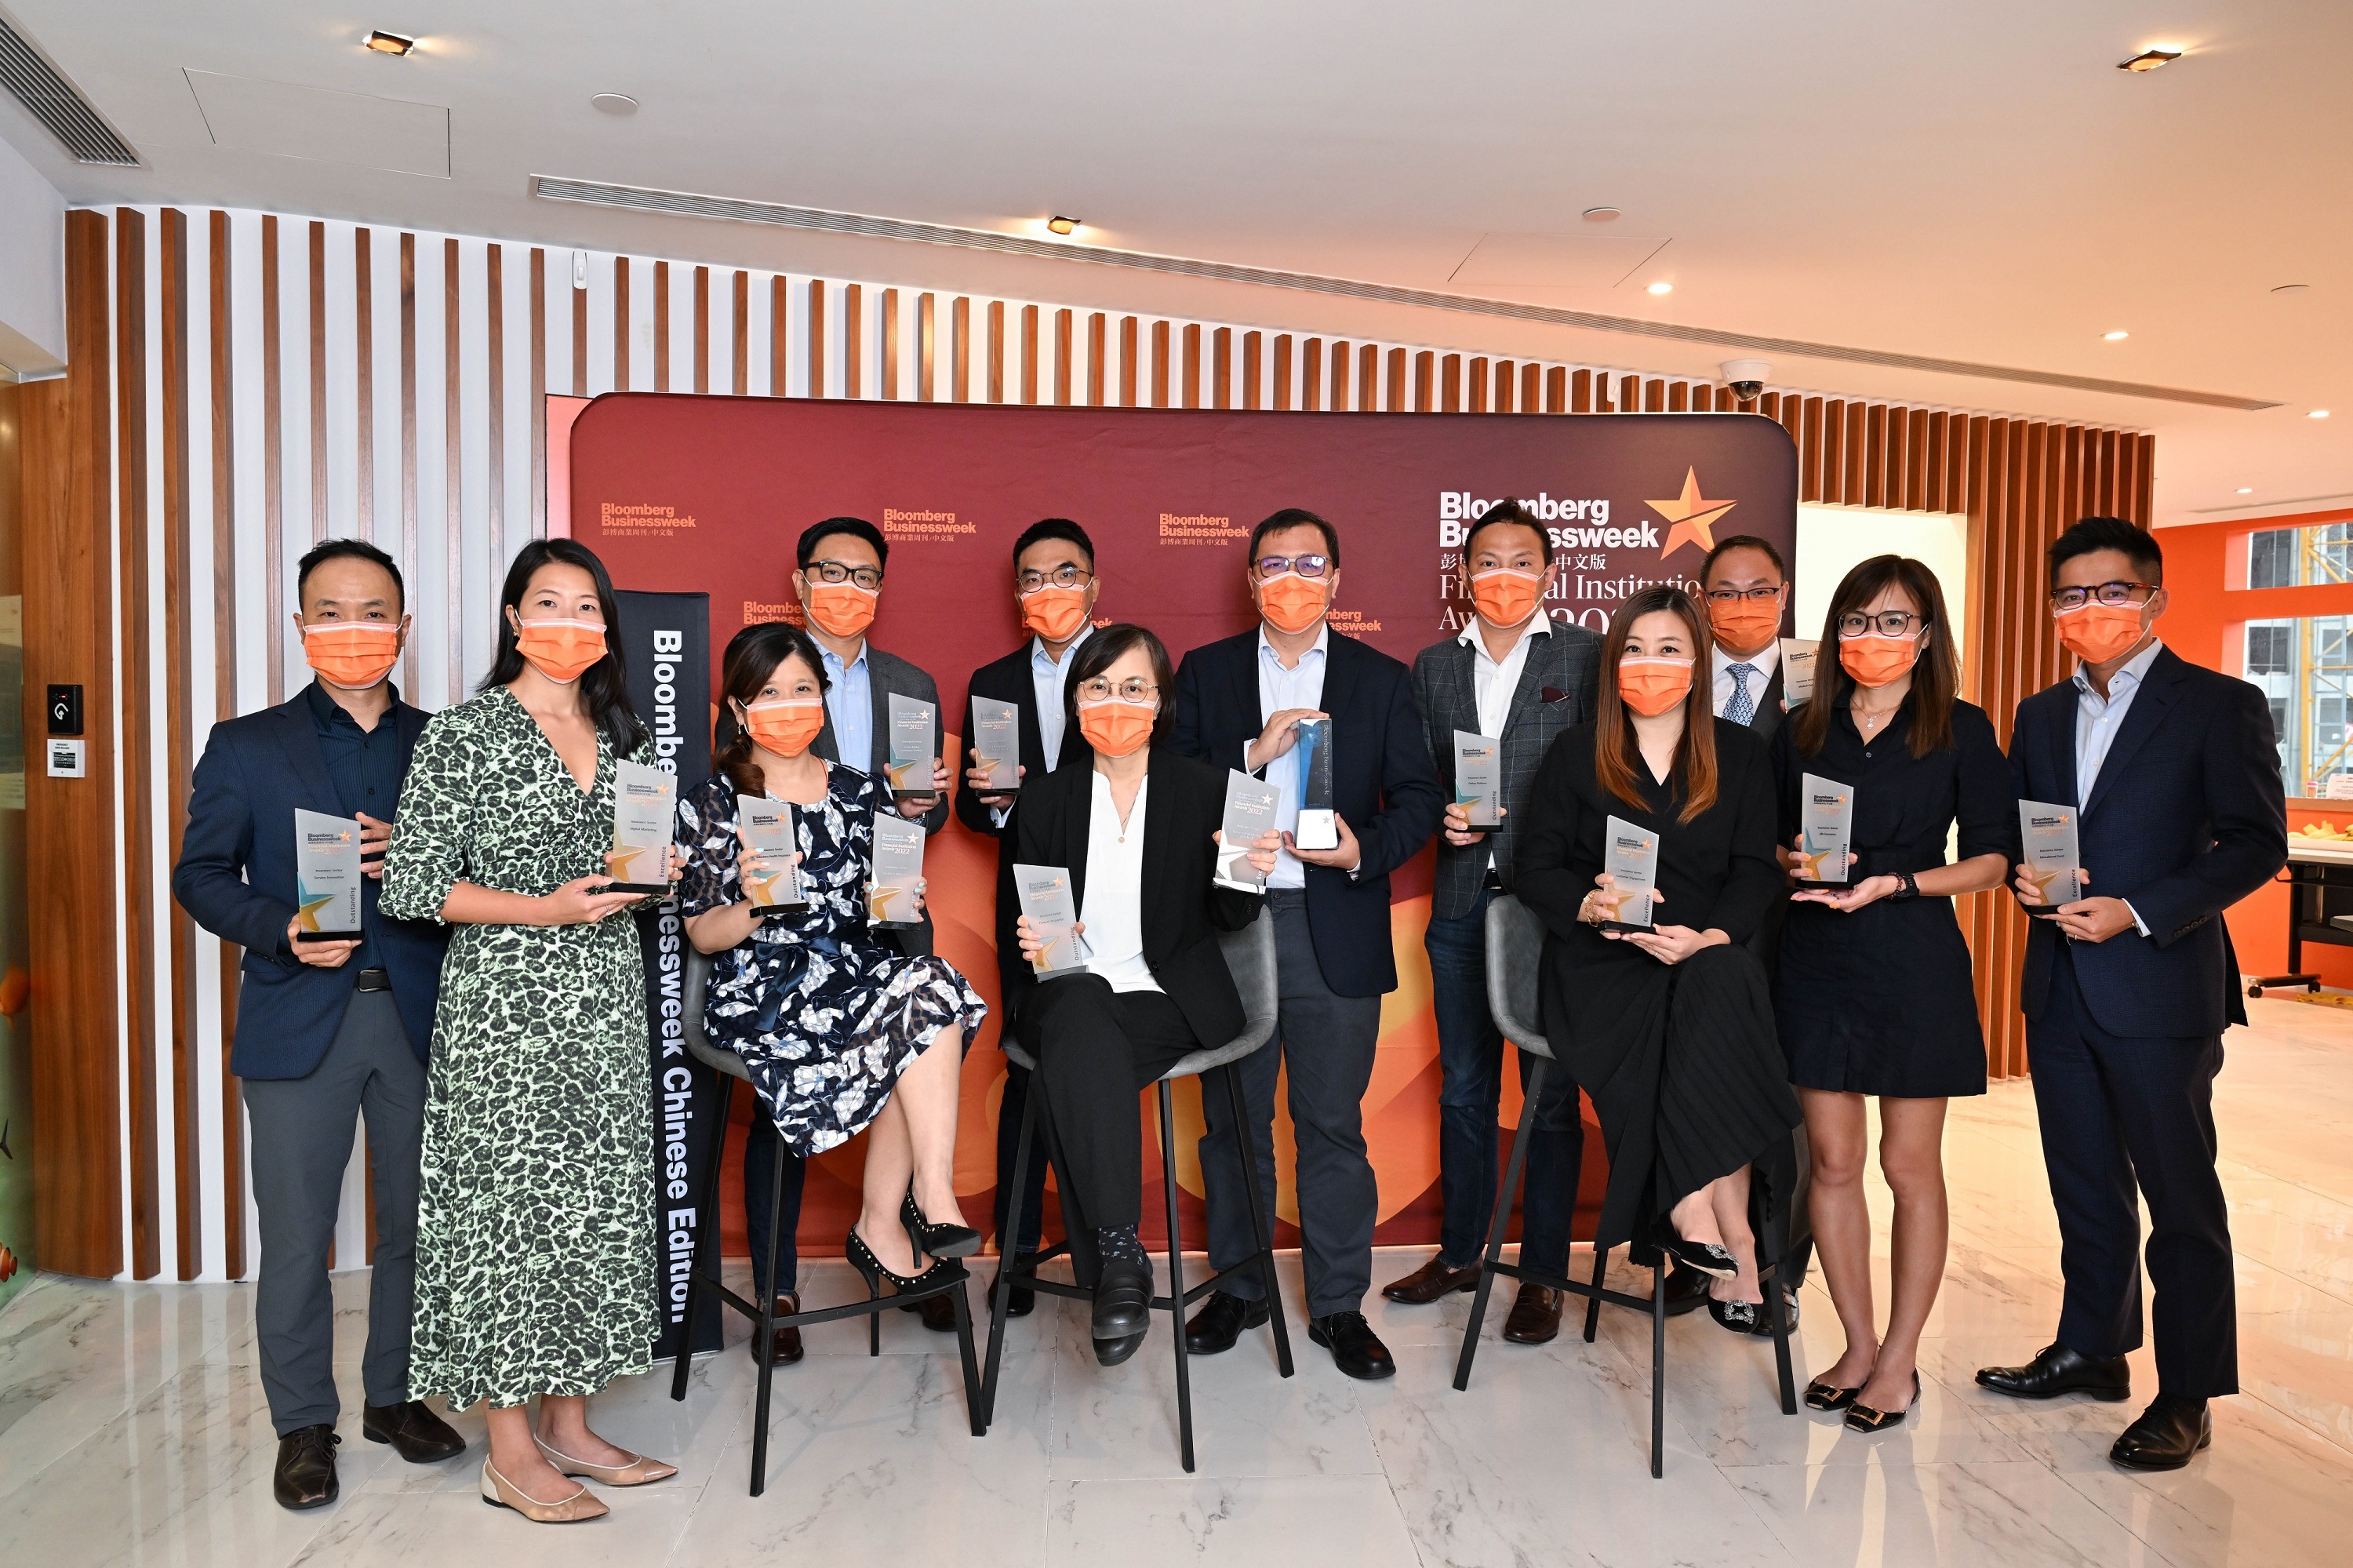 fwd breaks record at bloomberg businessweek financial institution awards 2022 with 14 wins